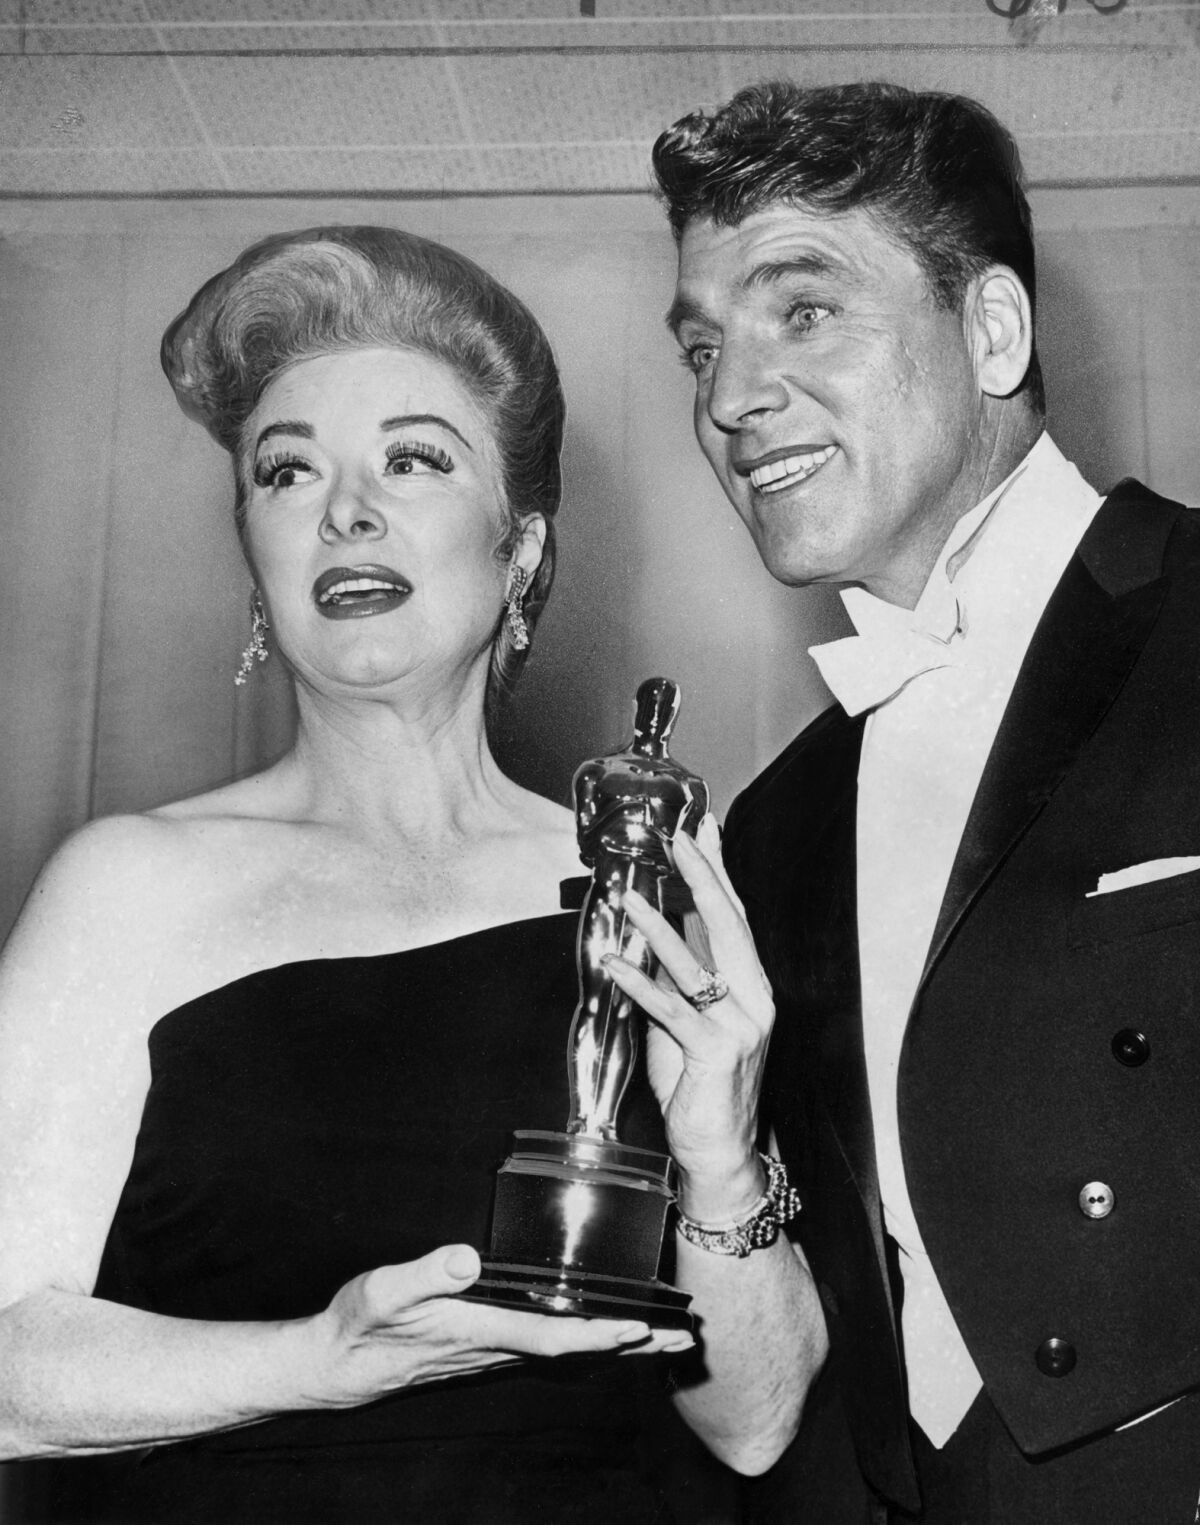 A woman in a strapless gown holds a statuette alongside a smiling man in white tie and tails.